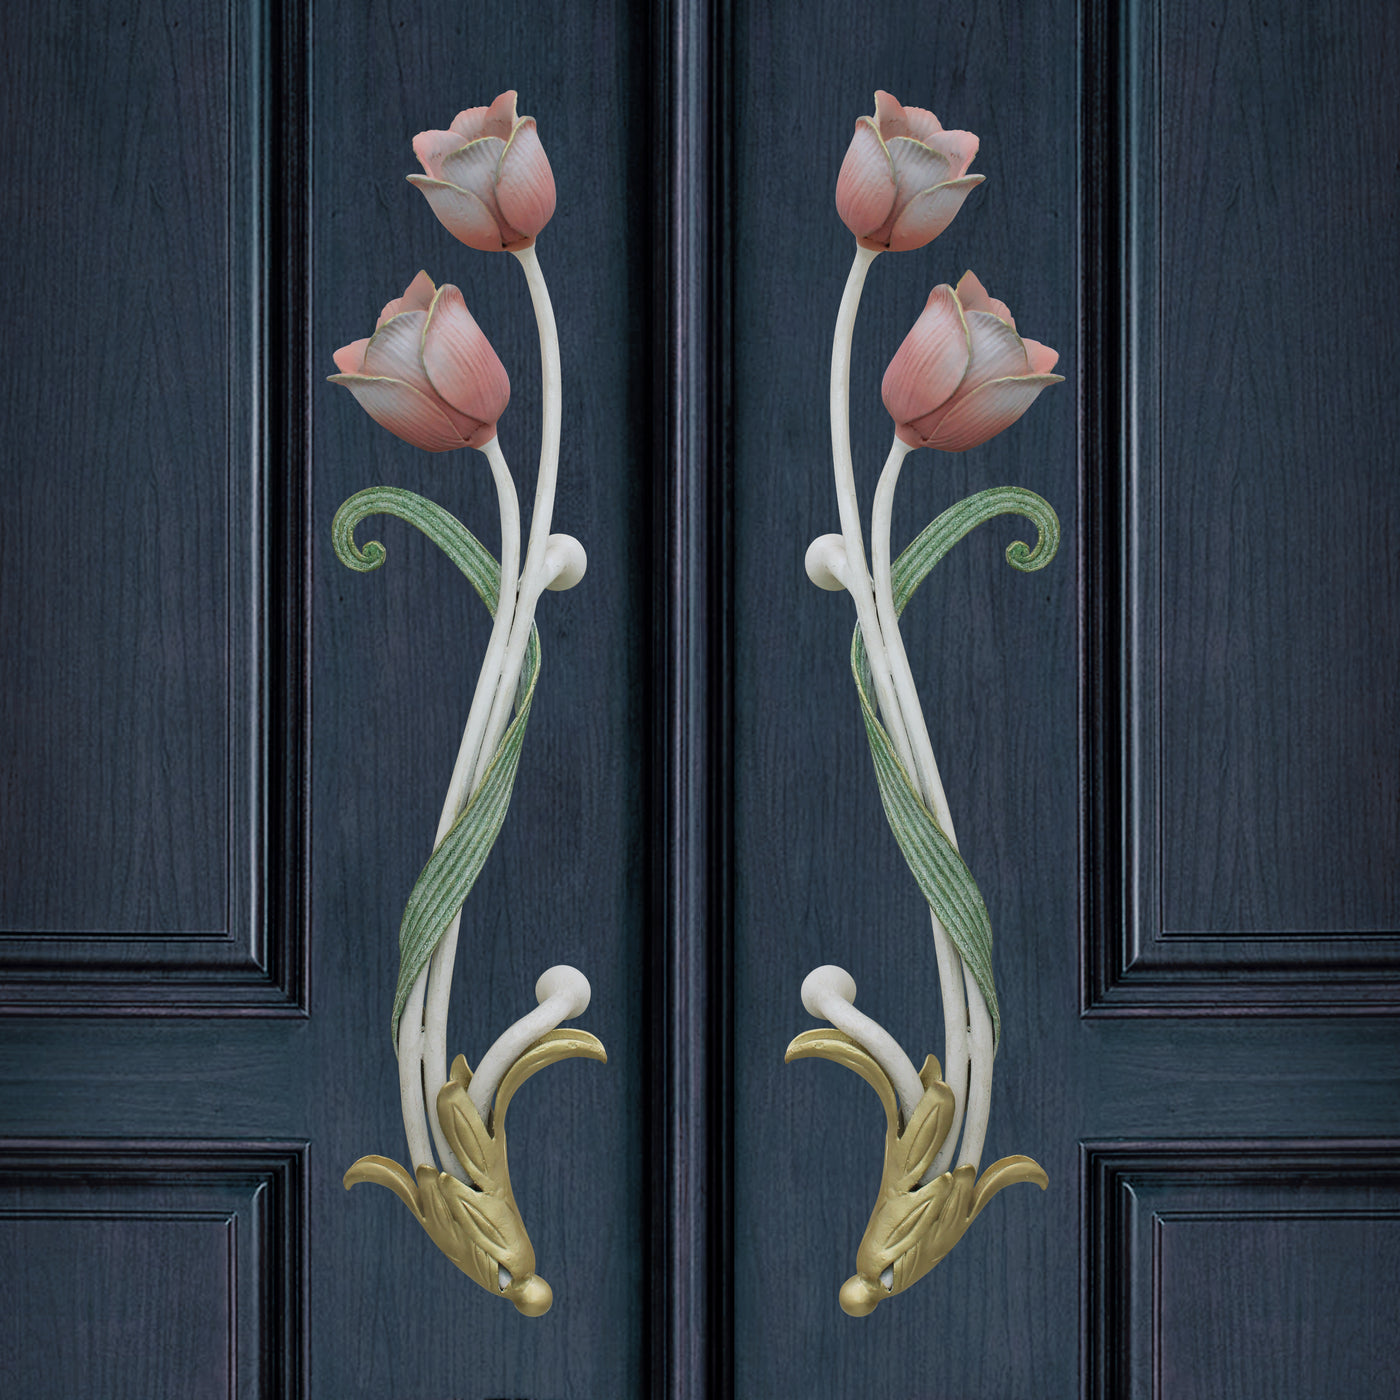 Pair of decorative pull handles inspired by tulips mounted on a closed blue door